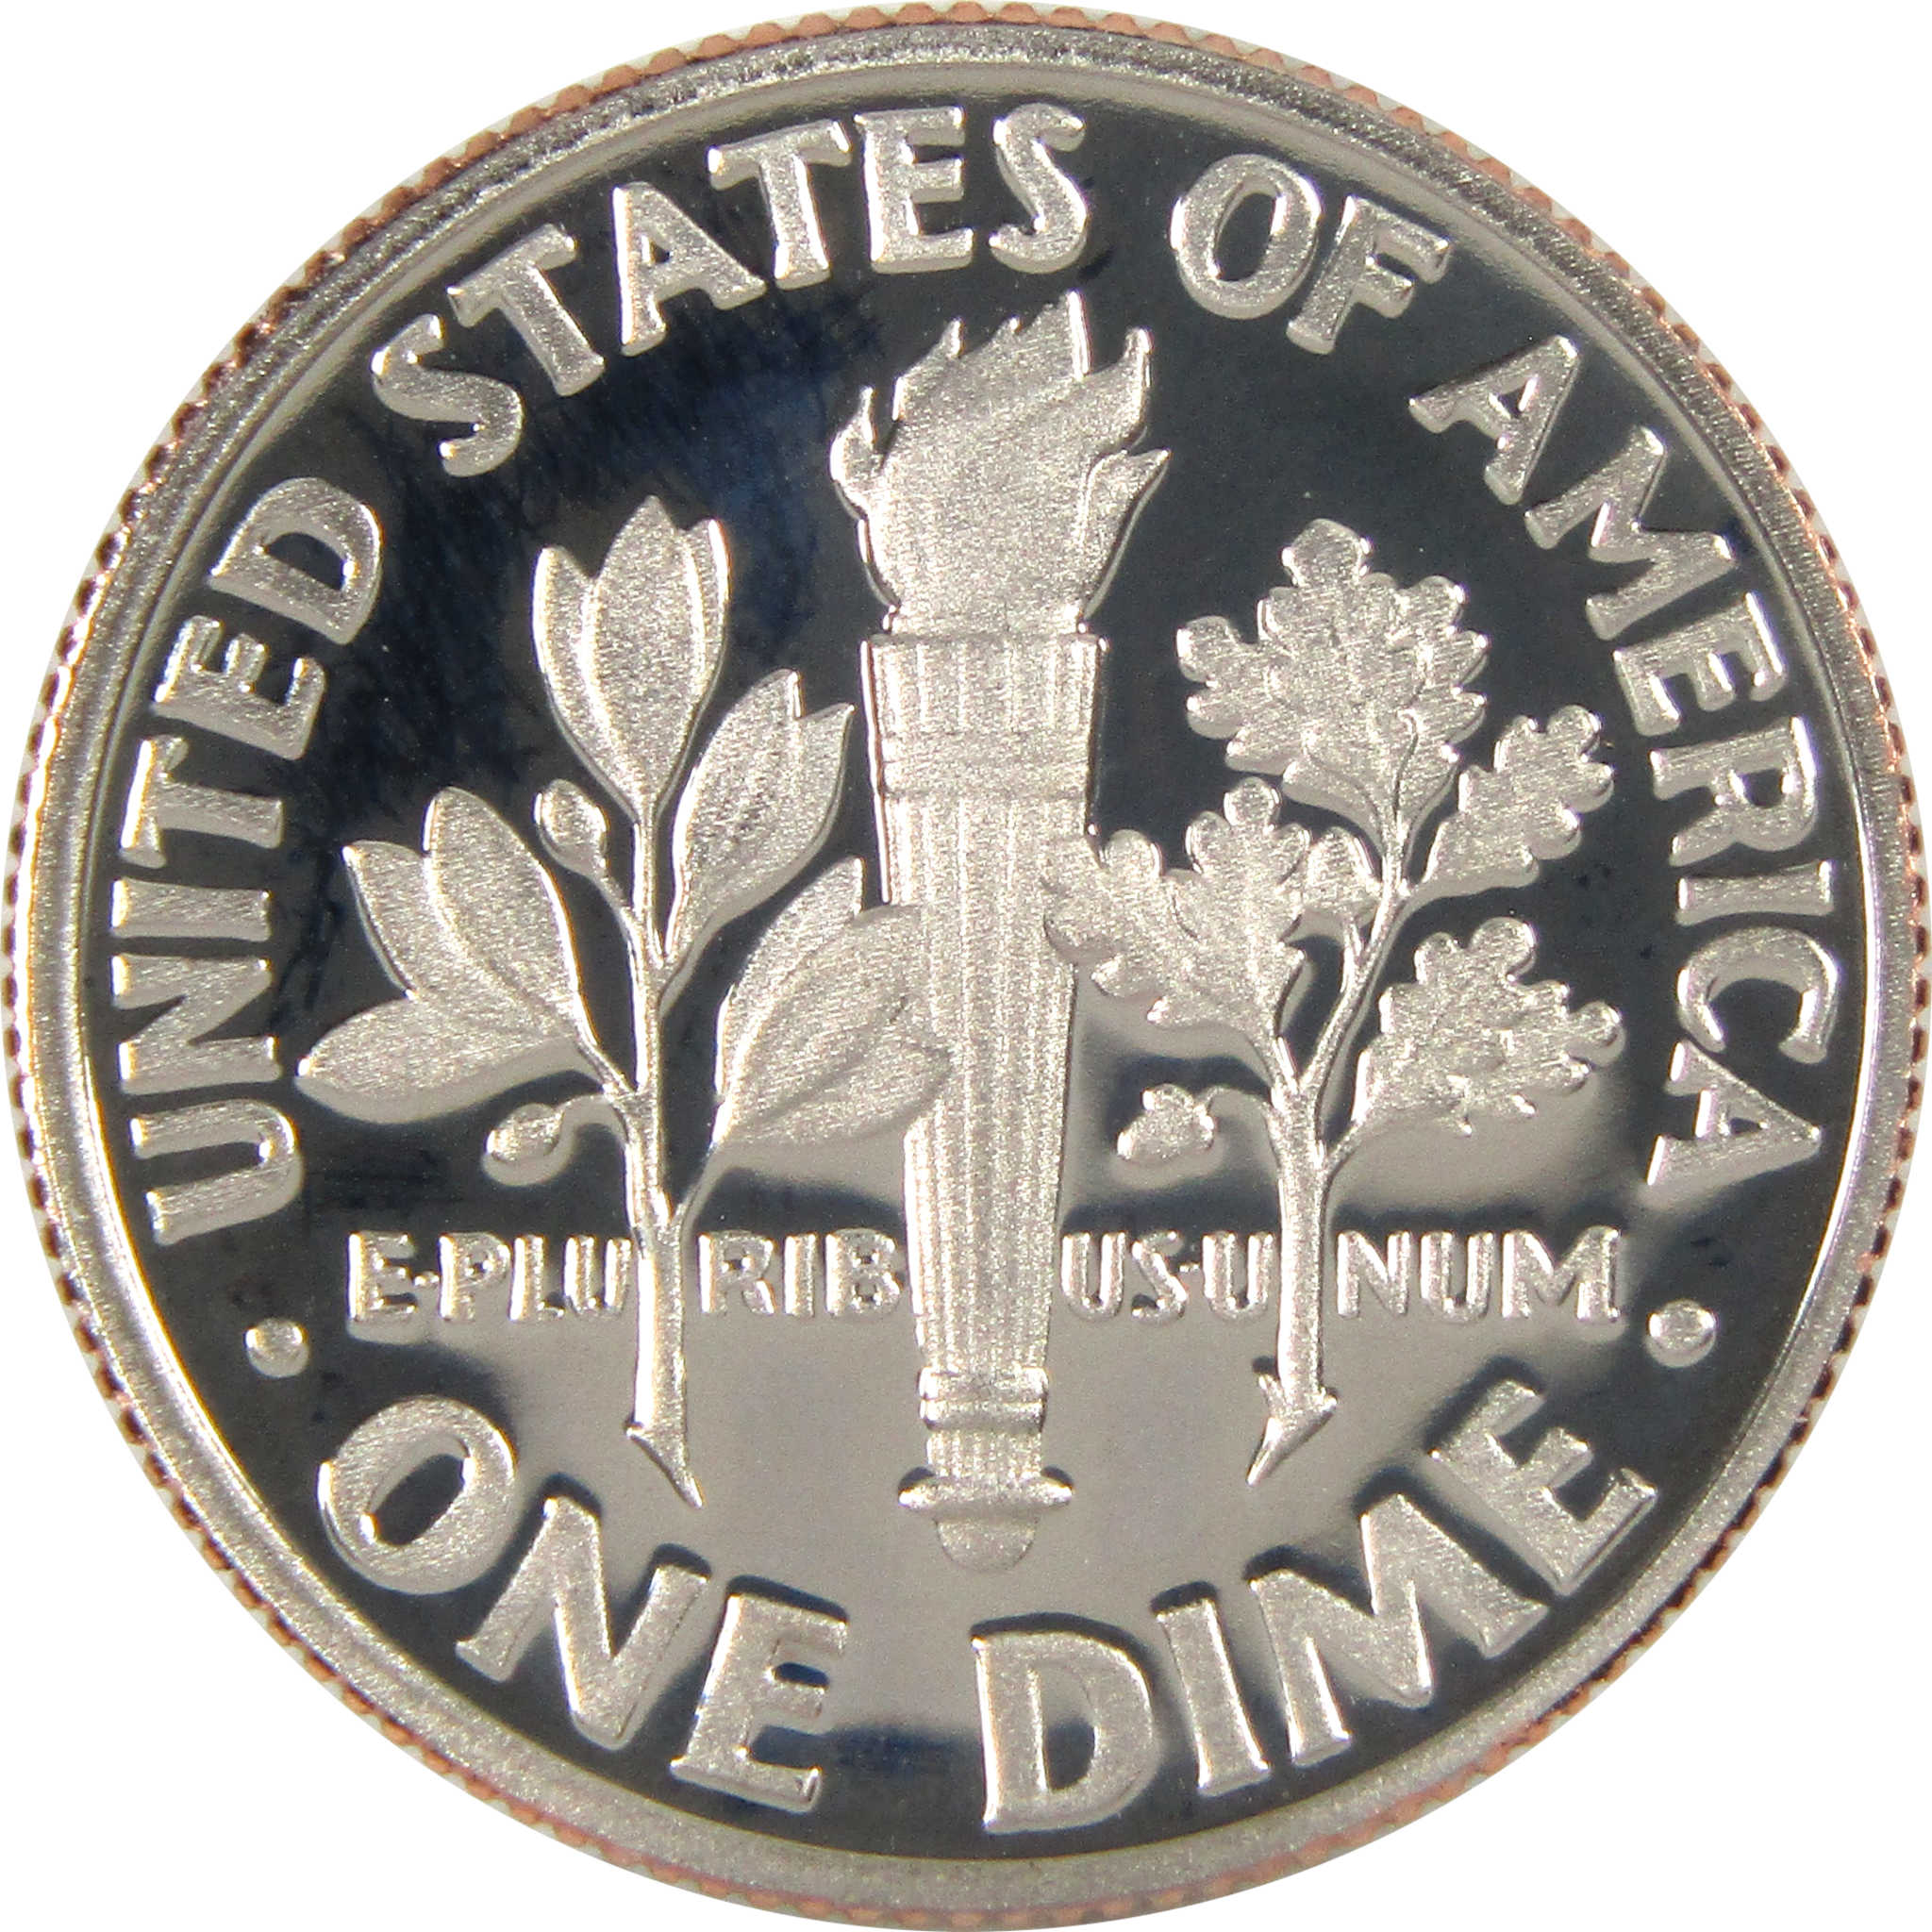 2021 S Roosevelt Dime Clad 10c Proof Coin